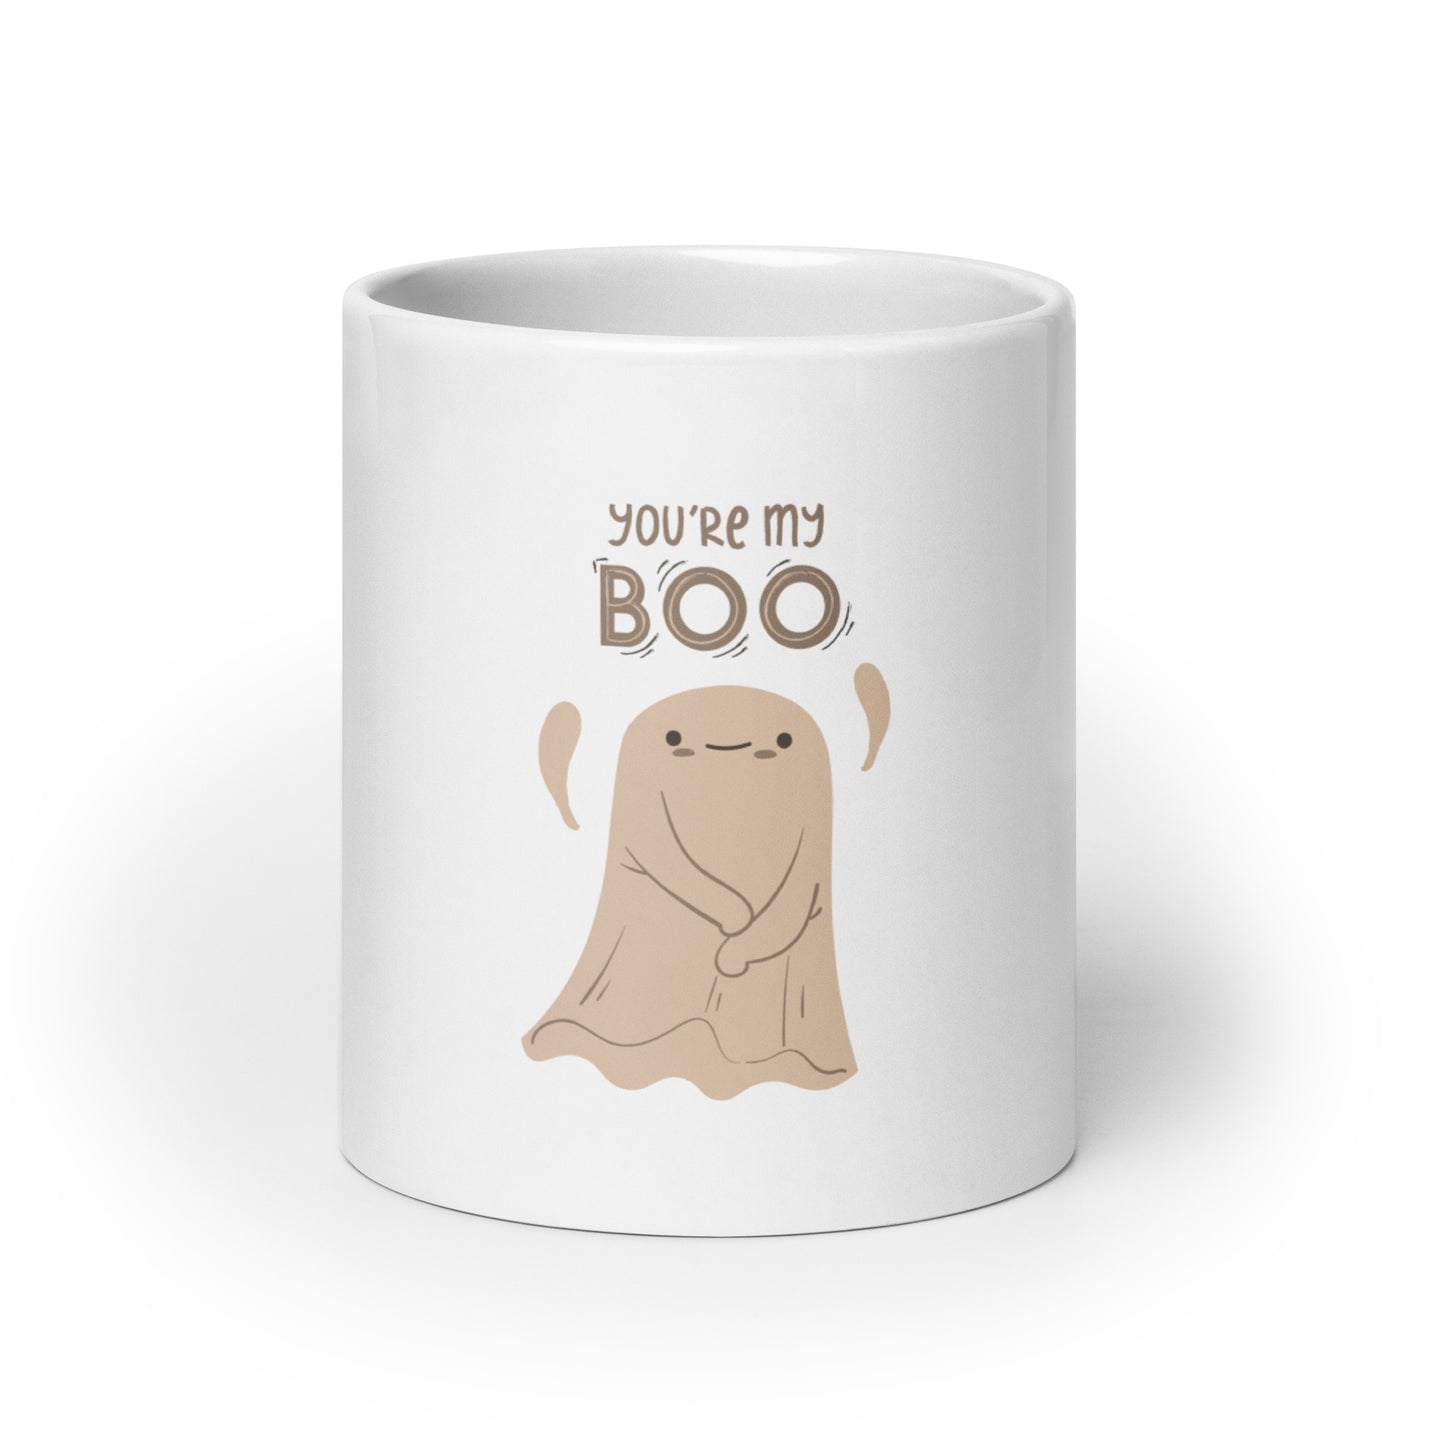 You Are My Boo - White Glossy Mug for Cozy Connections | Romantic Gift Idea